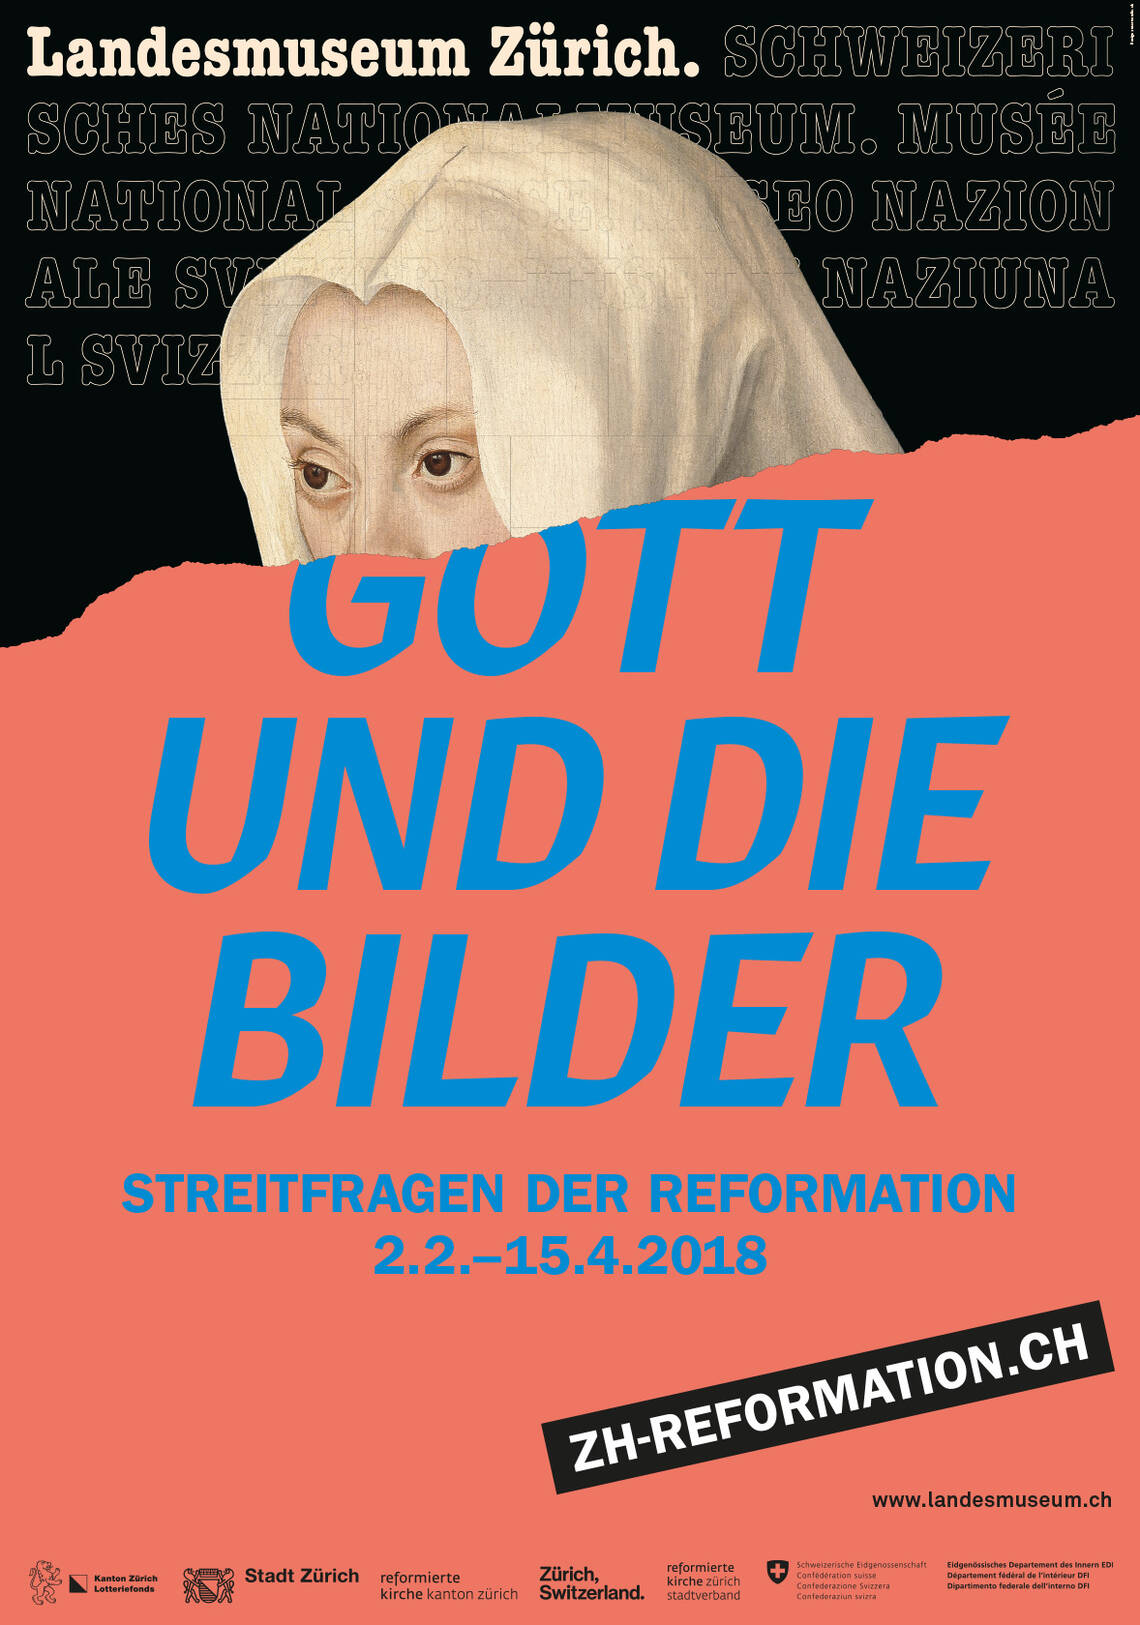 Poster of the exhibition "Controversies of the Reformation